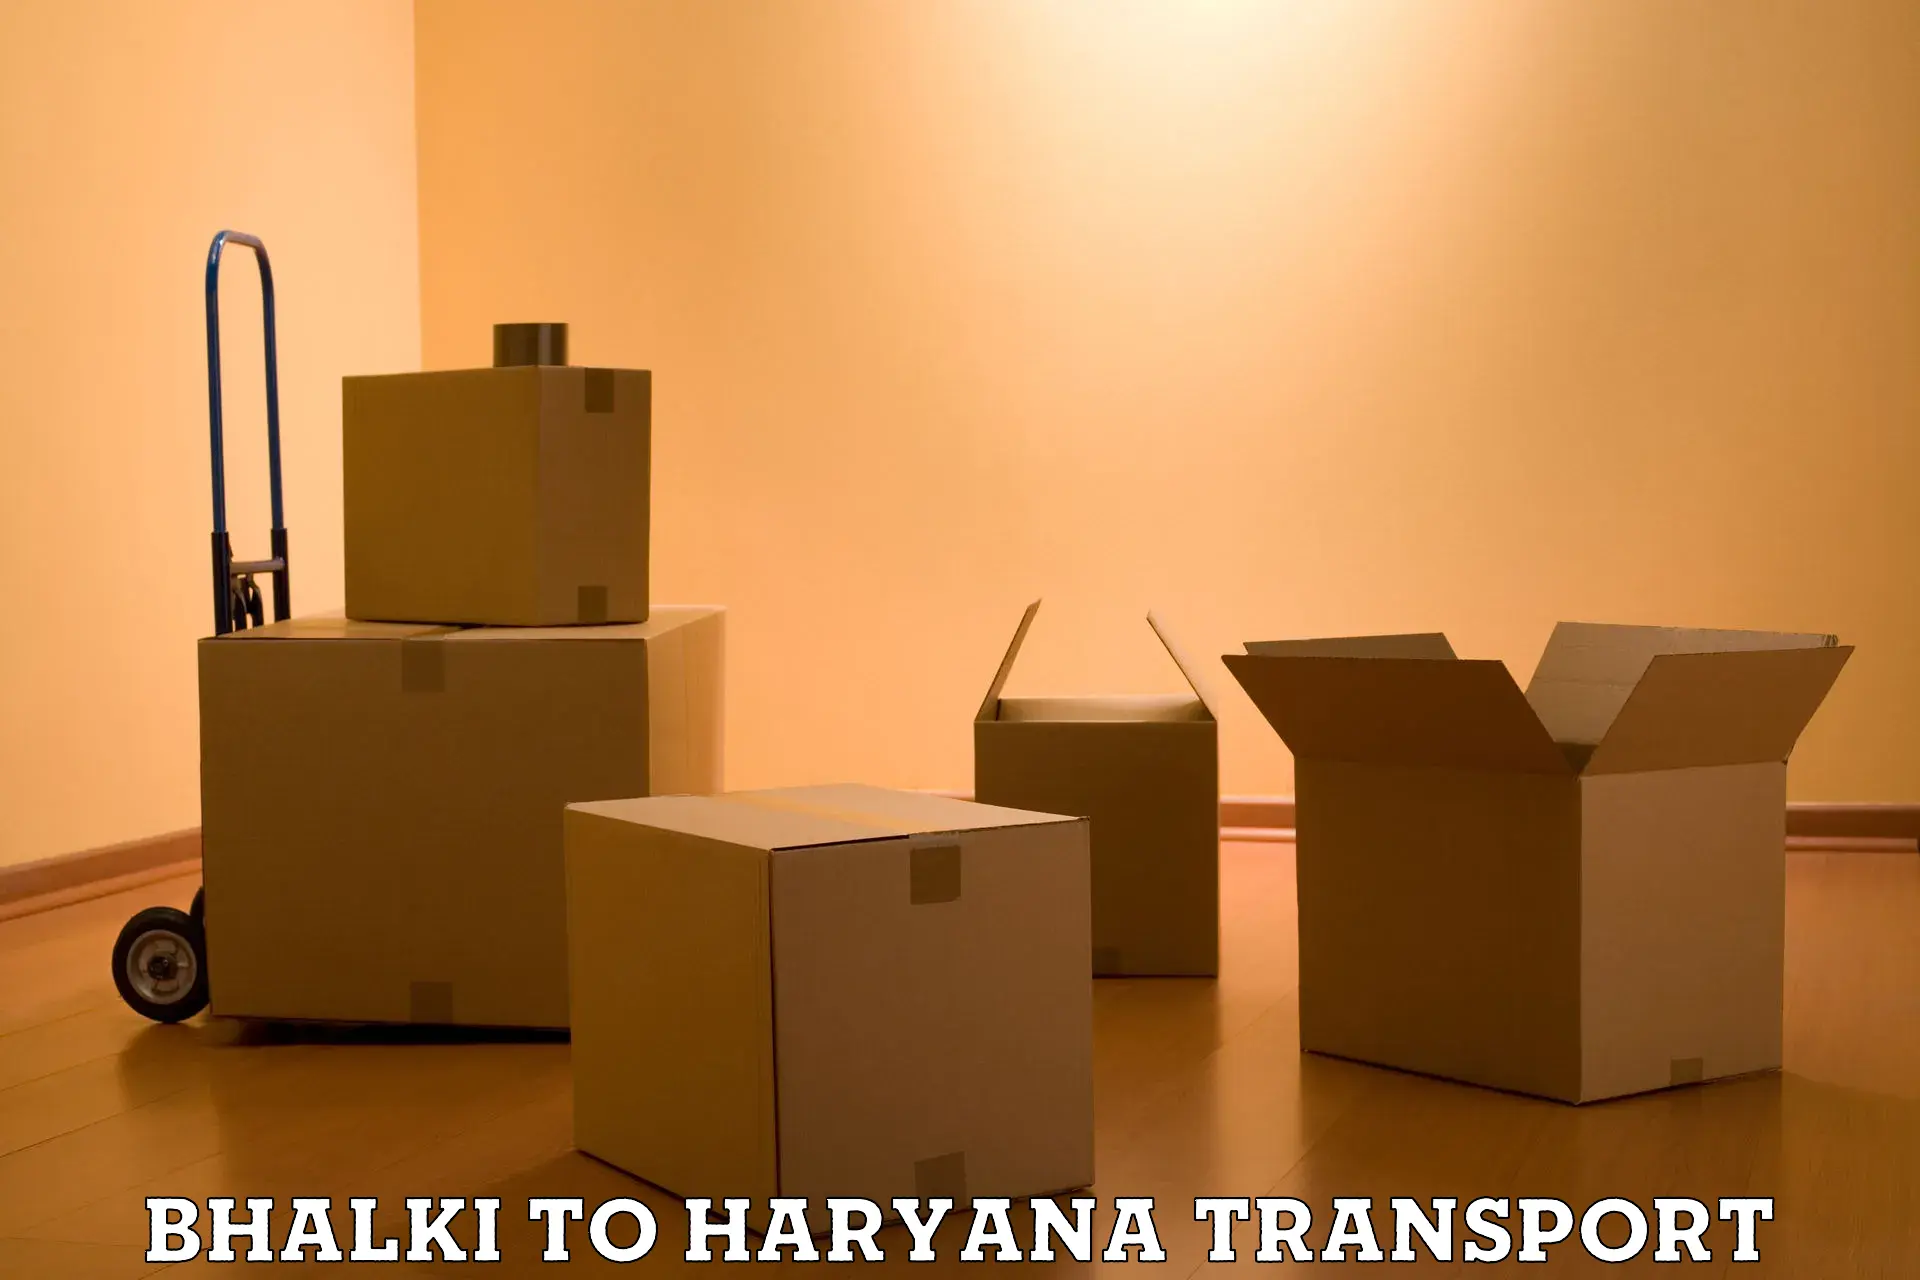 Daily transport service in Bhalki to Gurgaon